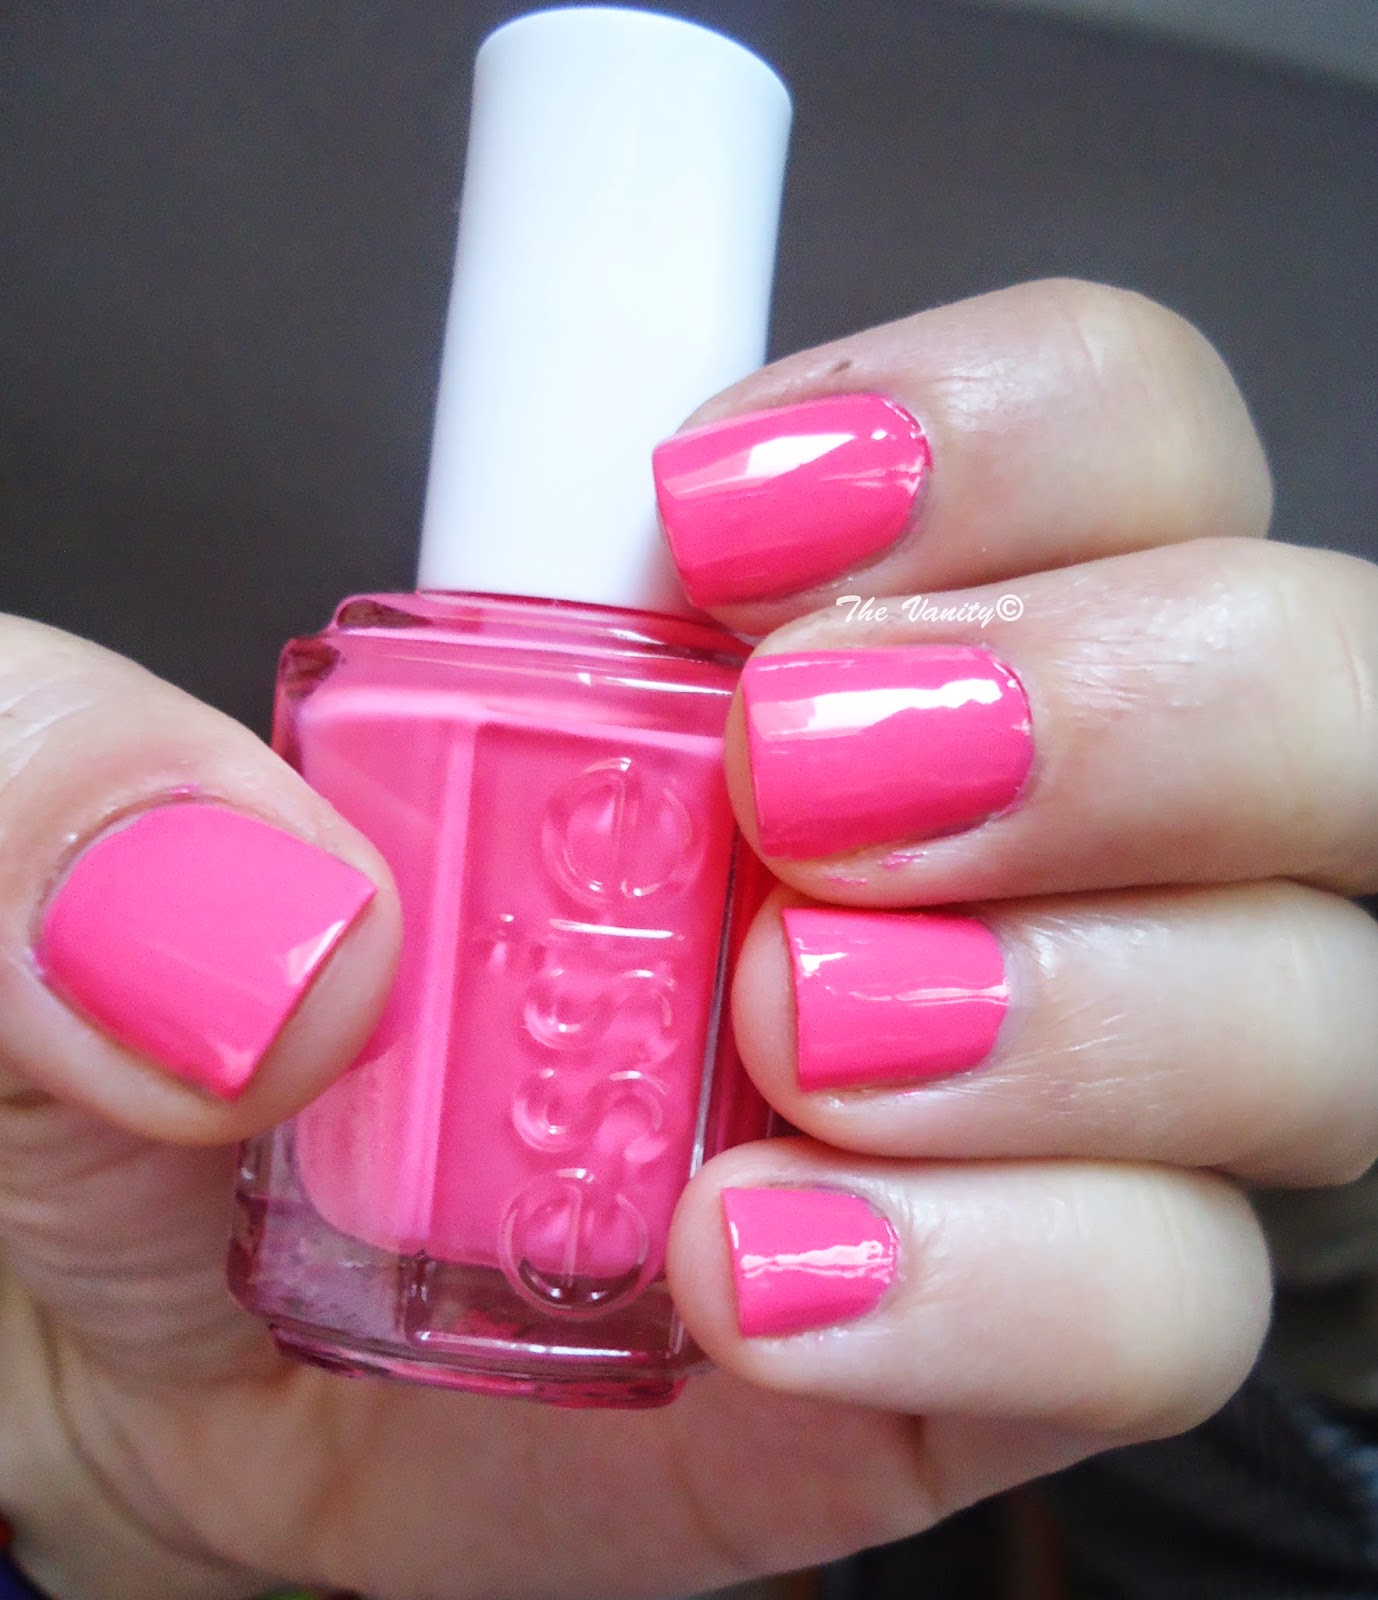 Essie Nail Polish in Nice Package review | The Vanity